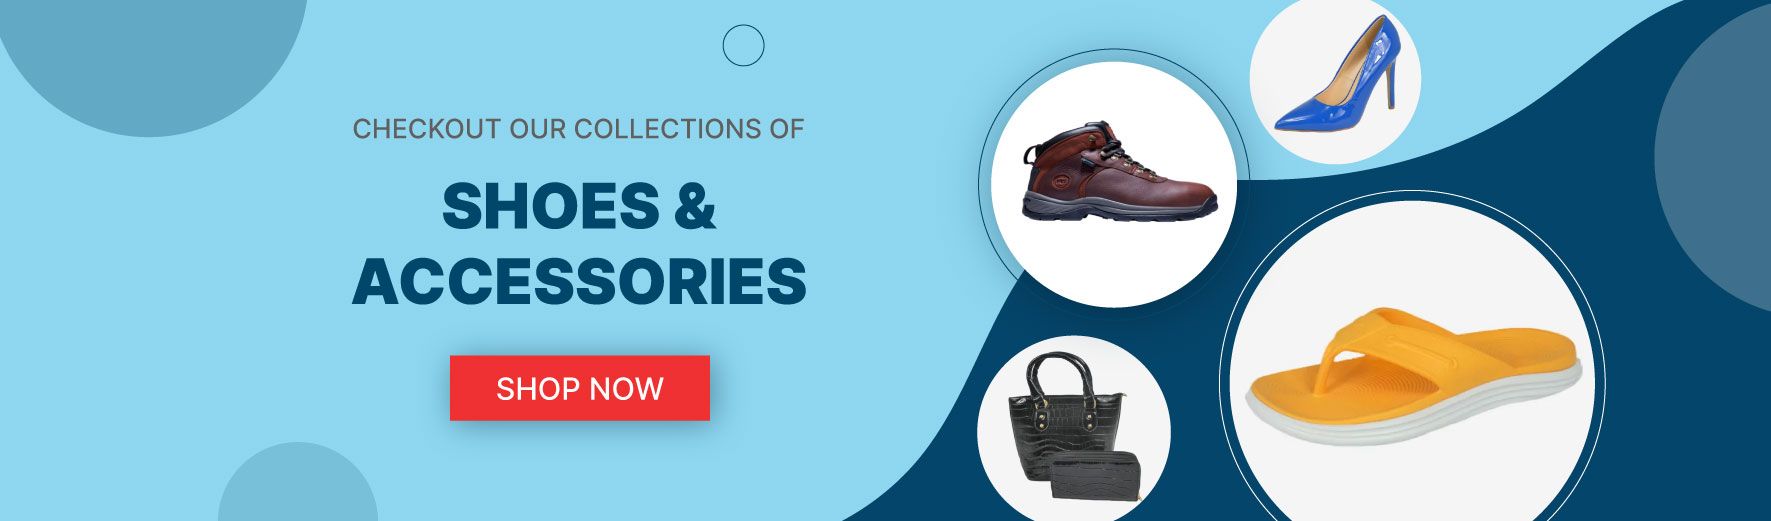 Affordable Men and Women's Shoes, Fashion, Bags and Accessories